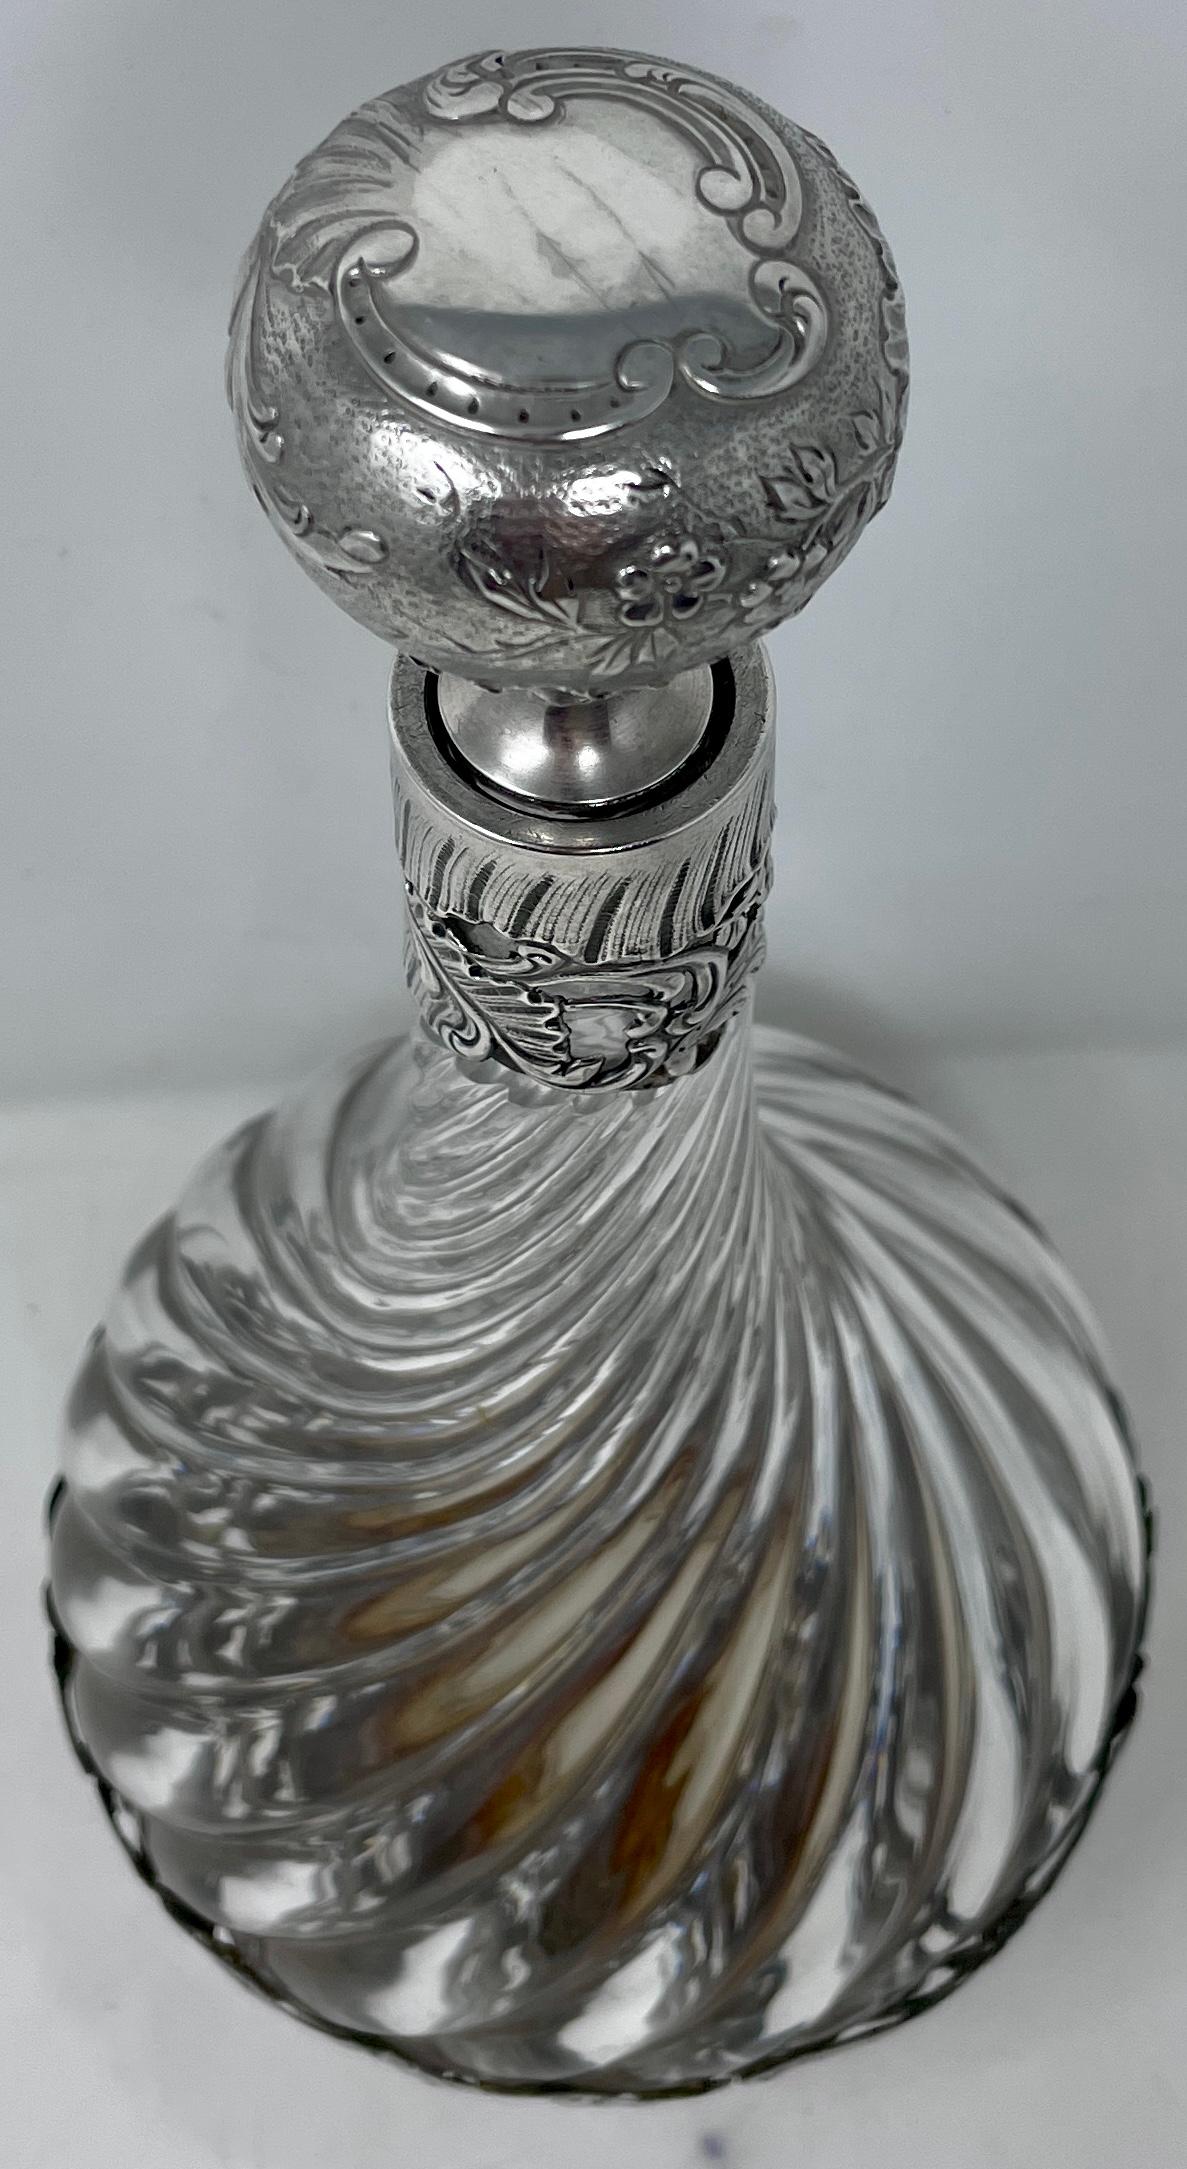 Antique French Baccarat cut crystal and silver overlay claret bottle, circa 1825-1835.